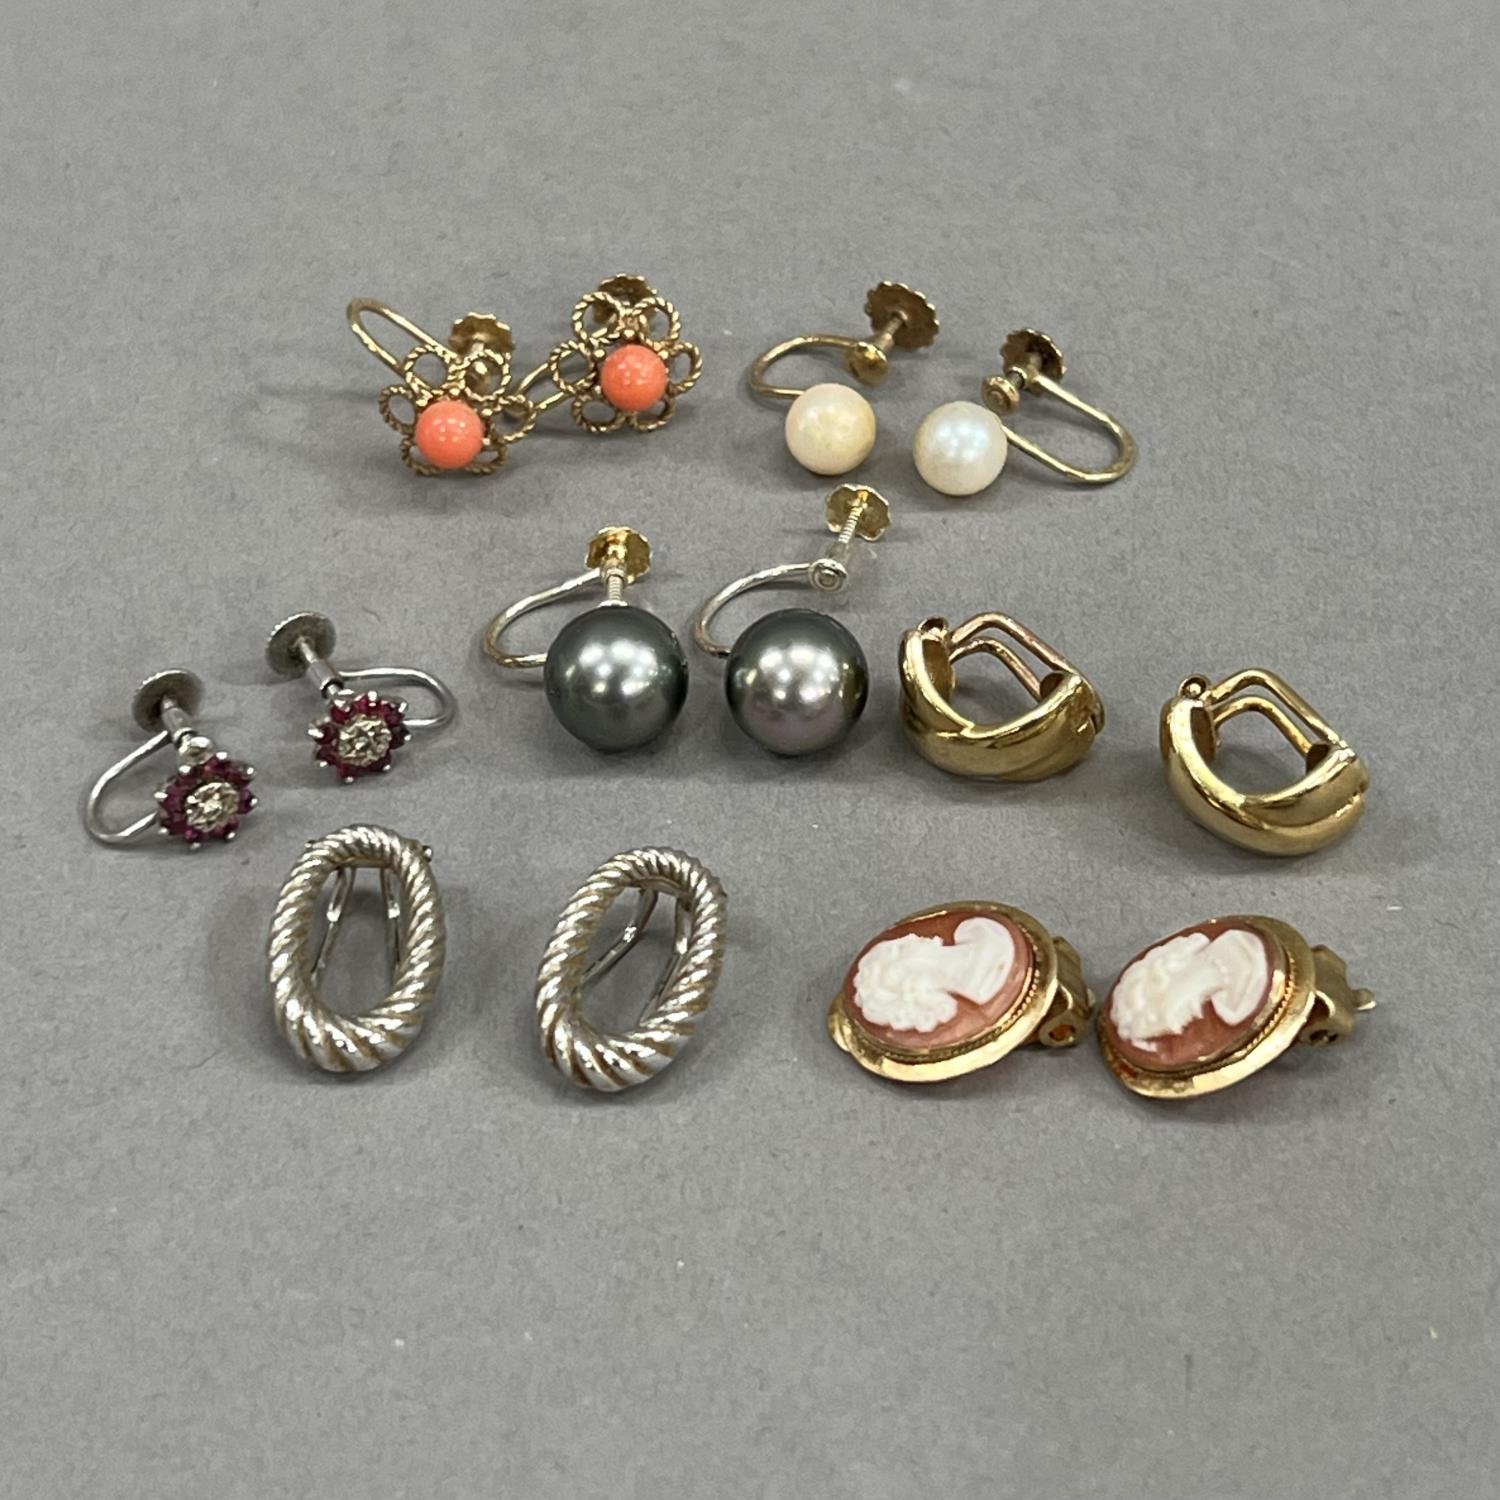 Seven pairs of earrings all with clip or screw fittings and all in yellow or white metal (tests as